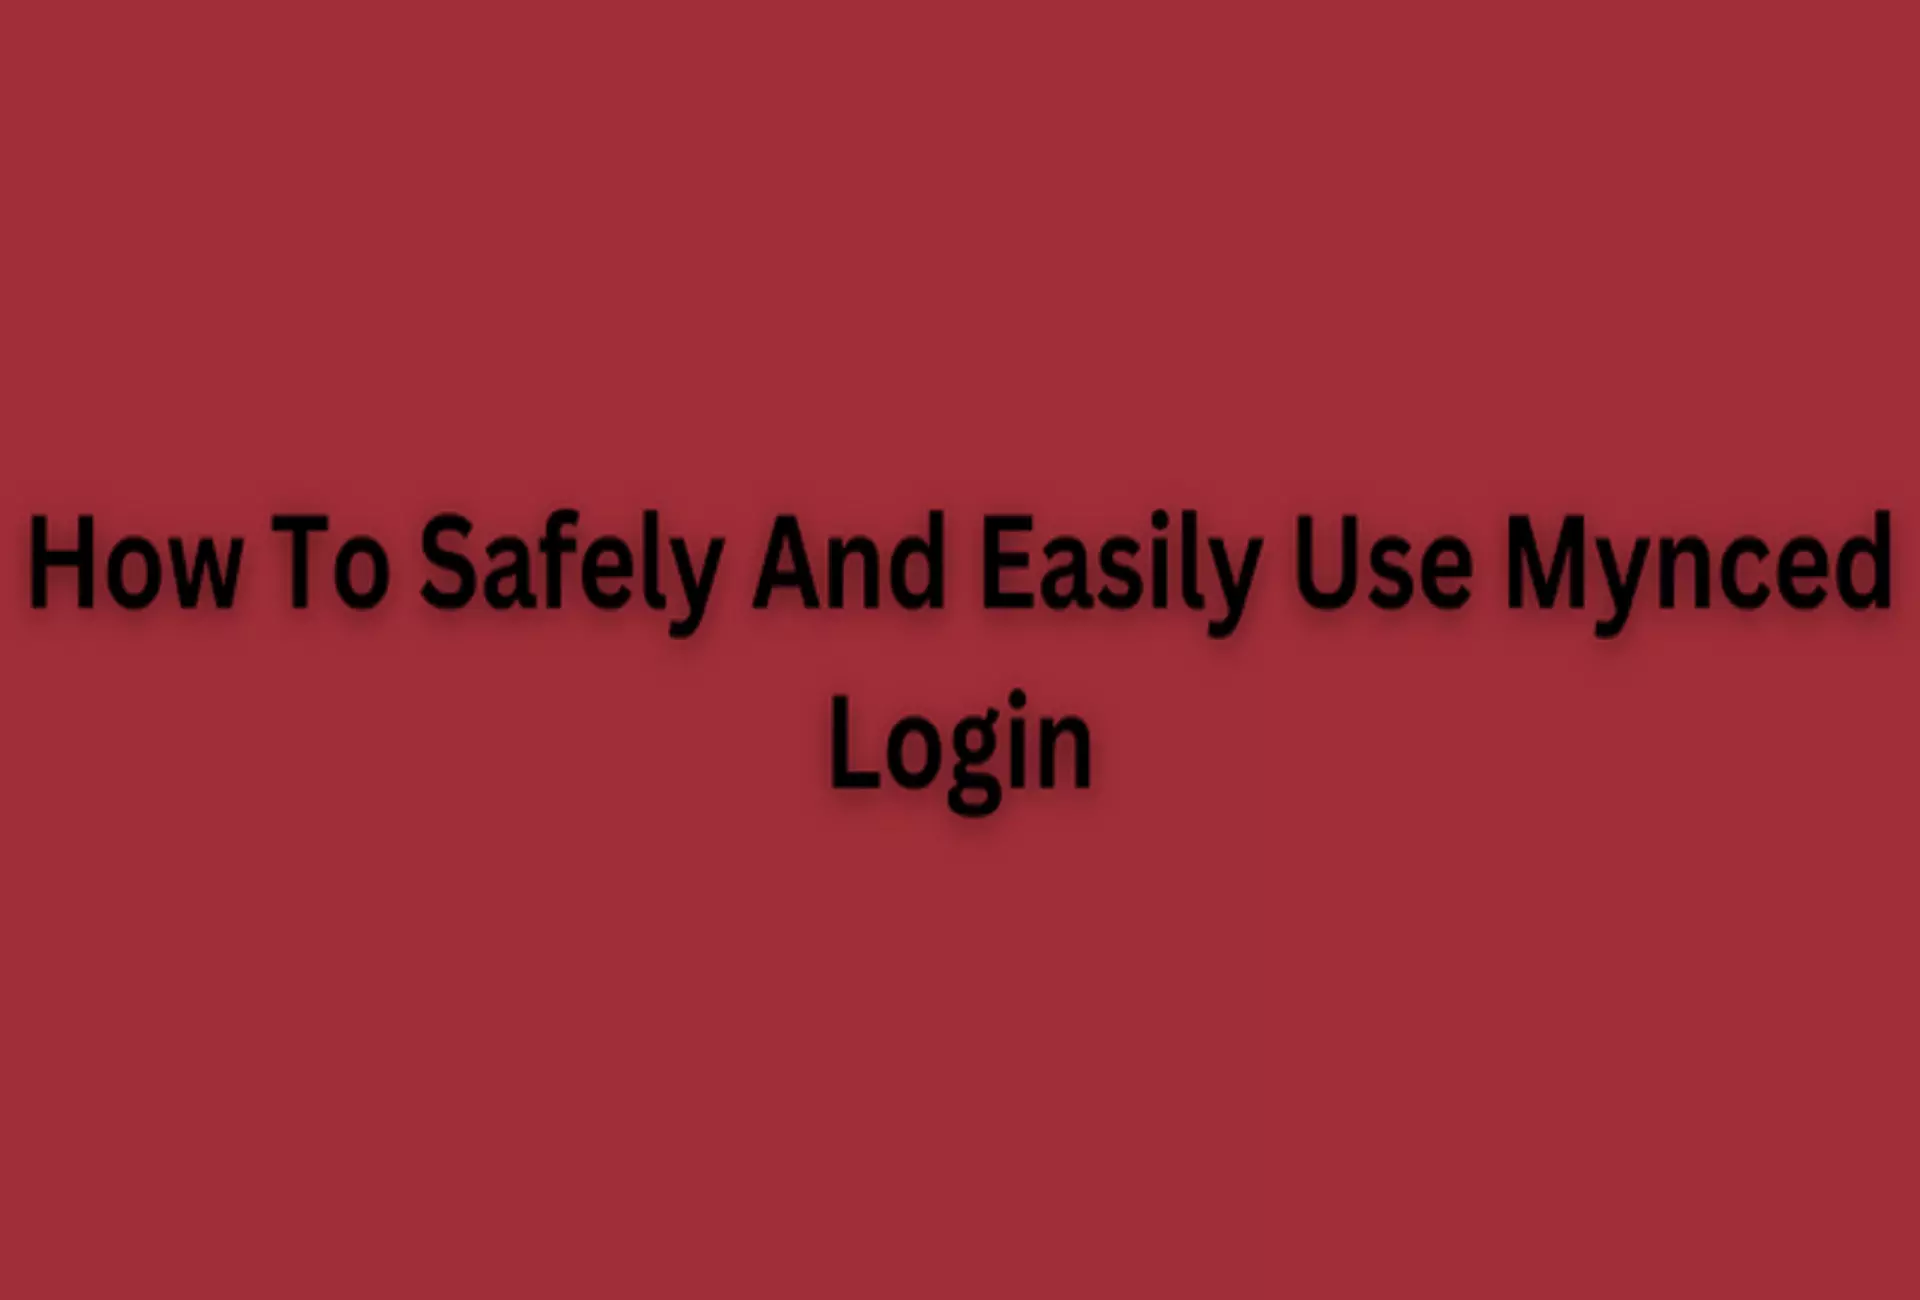 How To Safely And Easily Use Mynced Login